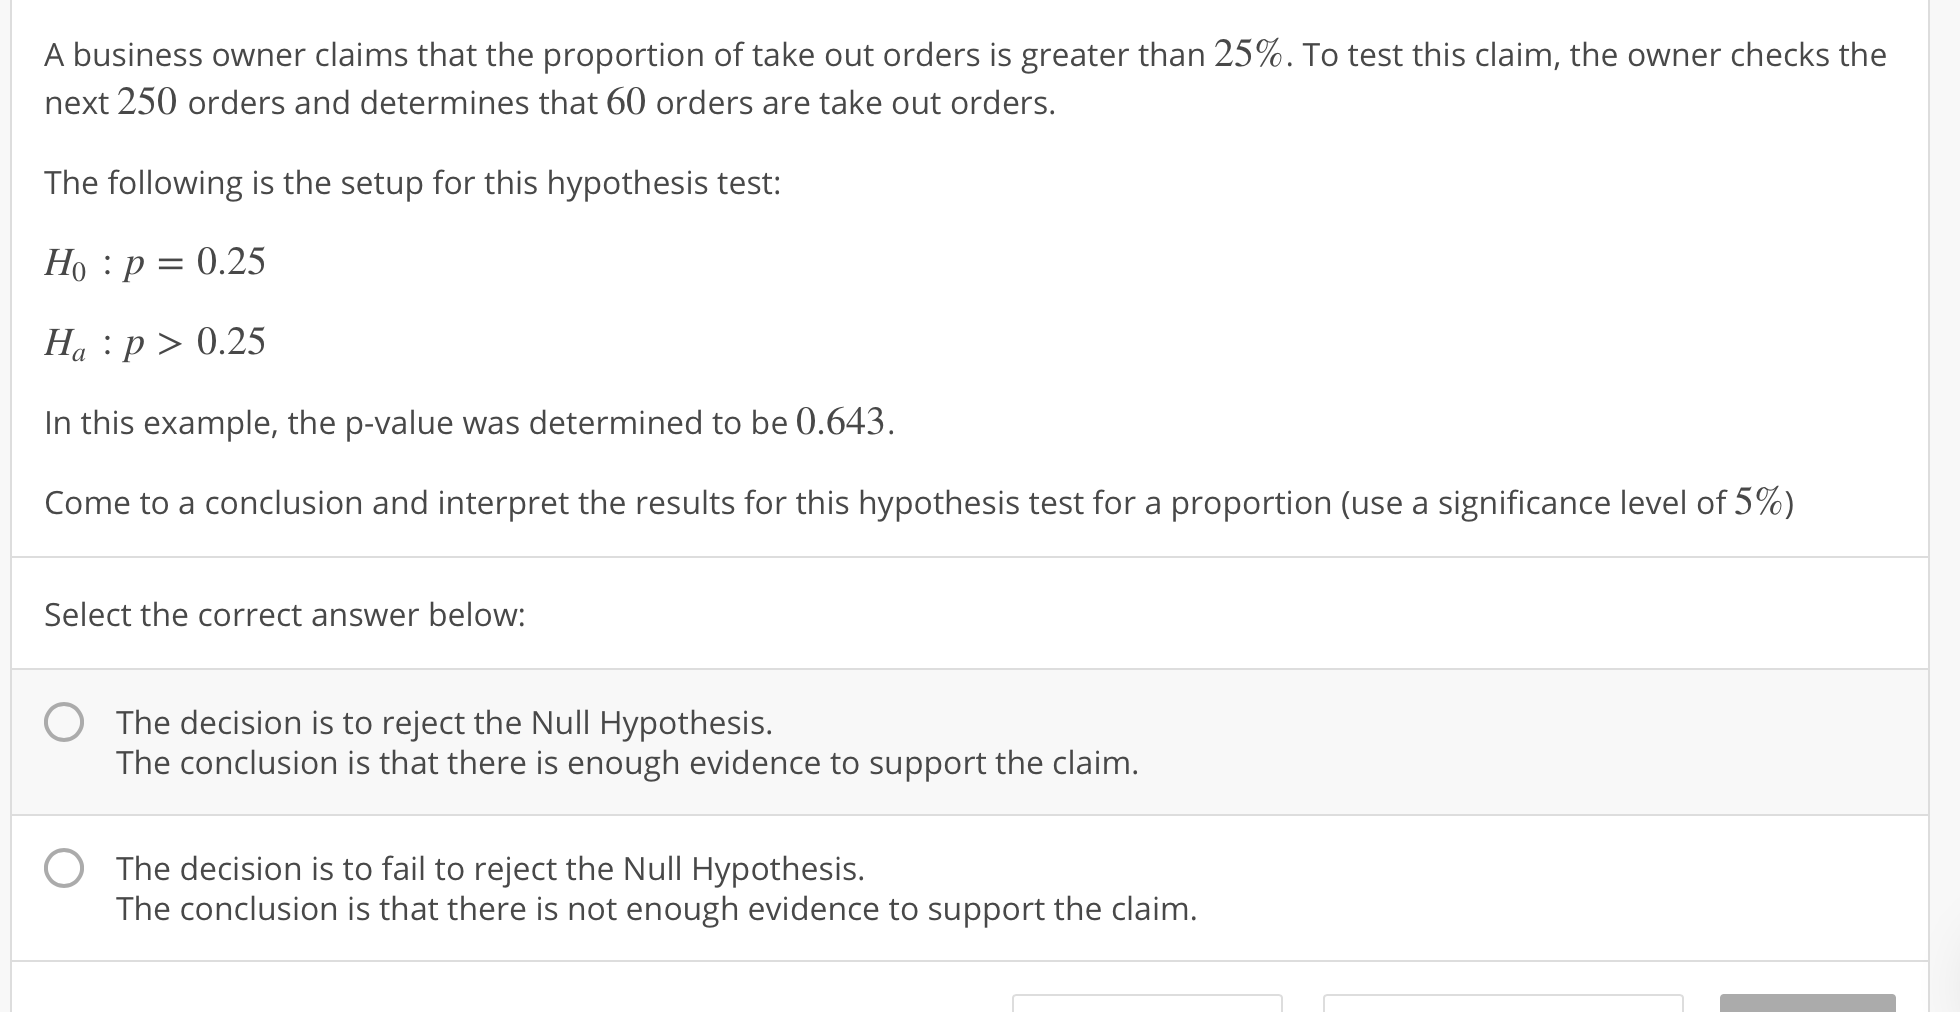 A business owner claims that the proportion of take out orders is greater than 25%. To test this claim, the owner checks the
next 250 orders and determines that 60 orders are take out orders
The following is the setup for this hypothesis test:
Ho :p 0.25
Ha p>0.25
In this example, the p-value was determined to be 0.643.
come to a conclusion and interpret the results for this hypothesis test for a proportion (use a significance level of 5%)
Select the correct answer below:
O
The decision is to reject the Null Hypothesis.
The conclusion is that there is enough evidence to support the claim.
The decision is to fail to reject the Null Hypothesis.
The conclusion is that there is not enough evidence to support the claim.
